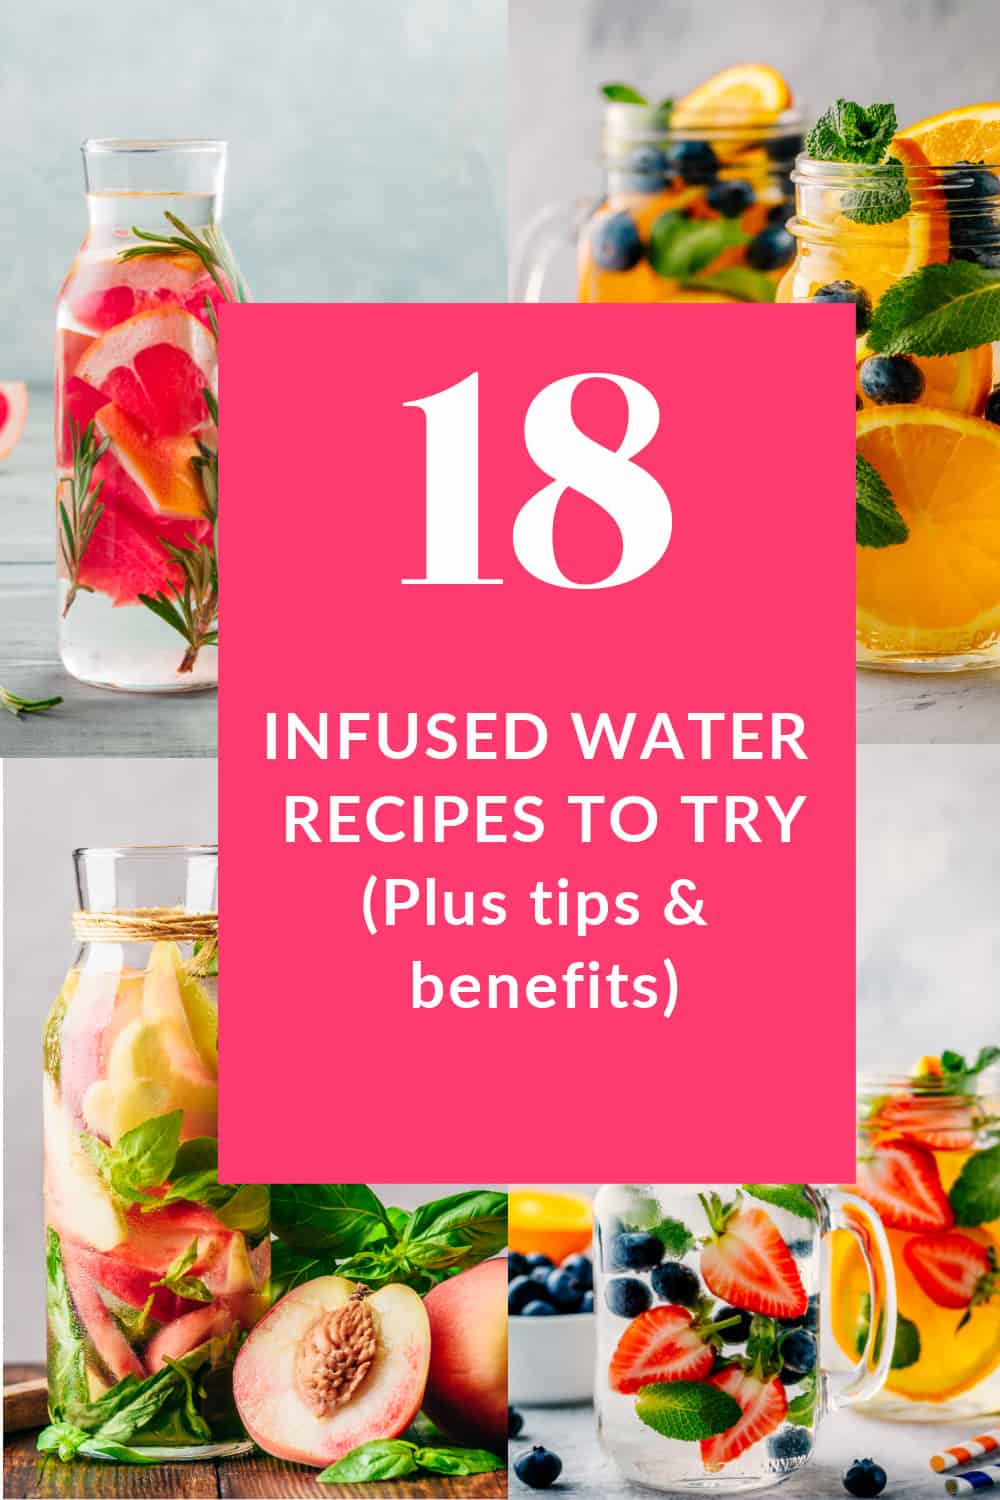 https://www.prettyopinionated.com/wp-content/uploads/2020/07/infused-water-recipes-p1.jpg